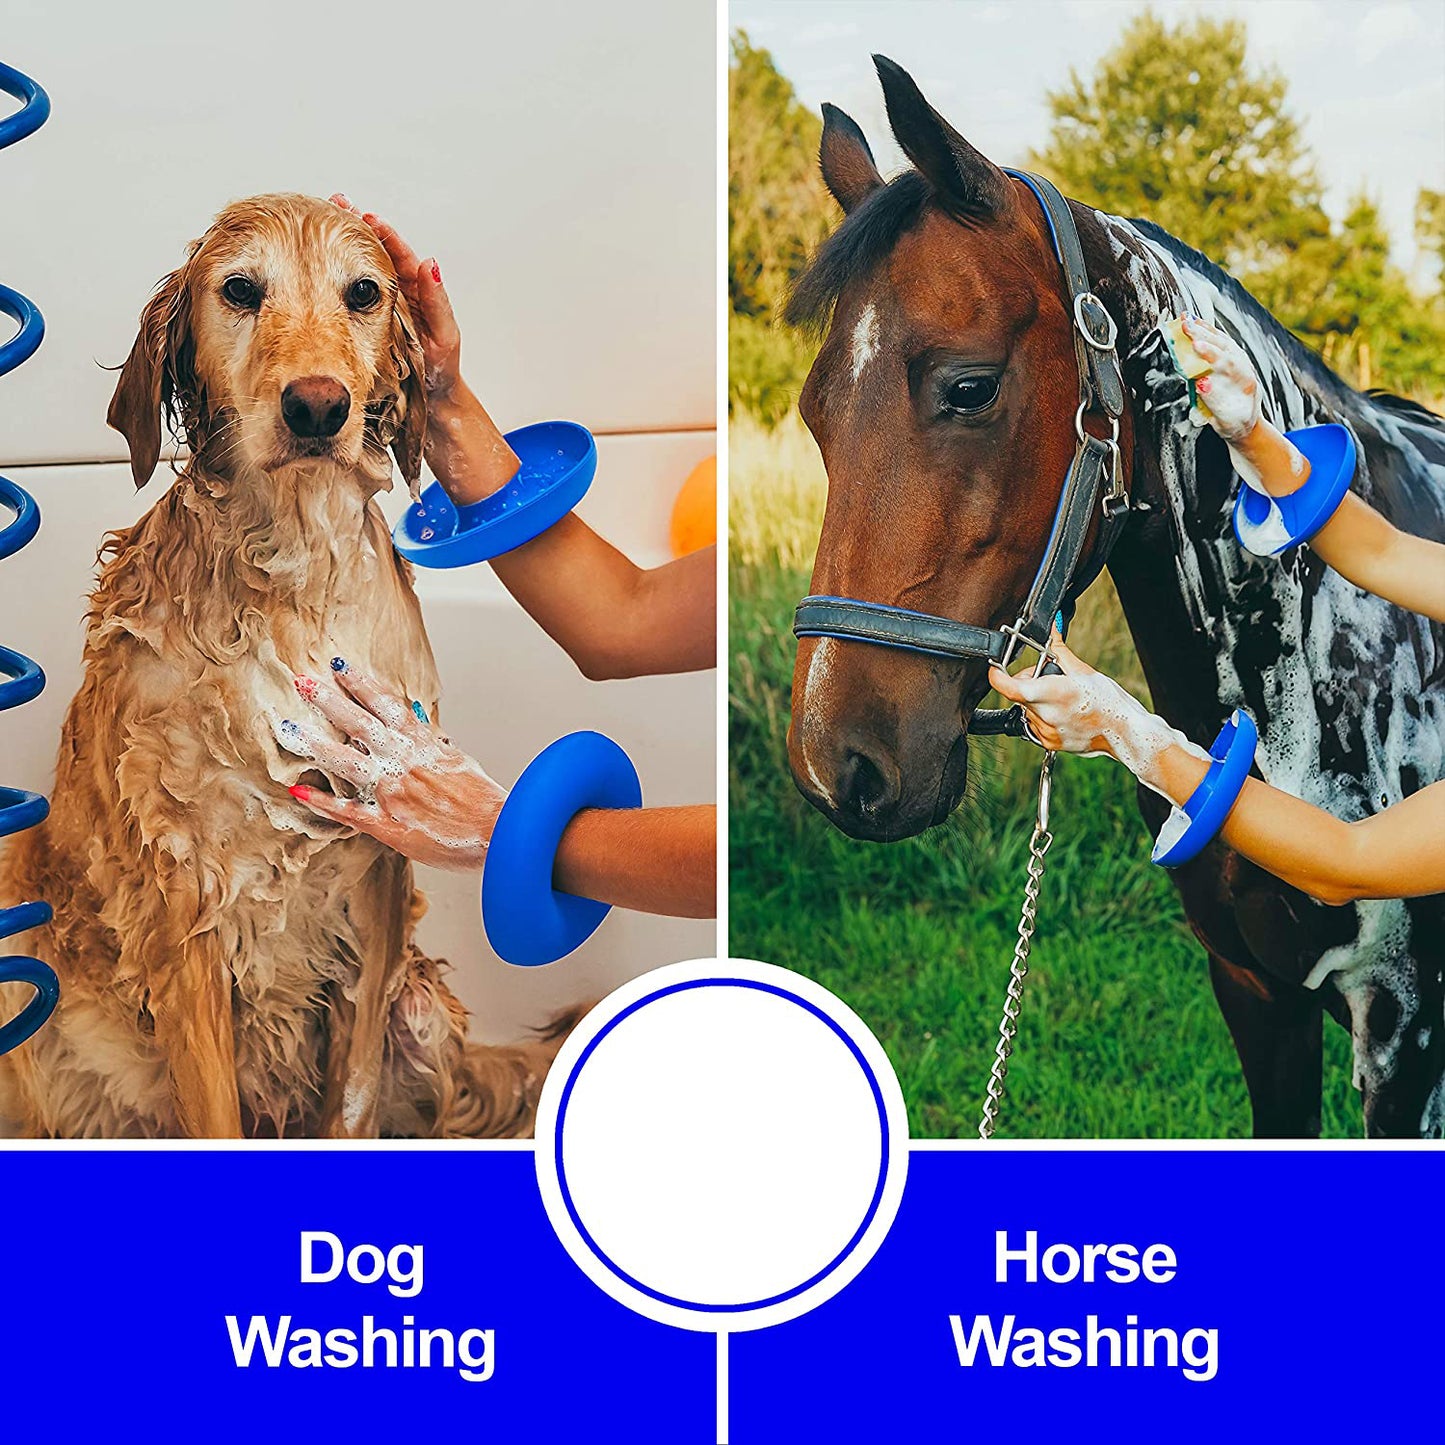 Drip Catcher Cuffs - Prevent Soap, Water, from Running Down Arms While Grooming with Pets Shampoo and Conditioner, Washing Supplies Pet Bathing Tool